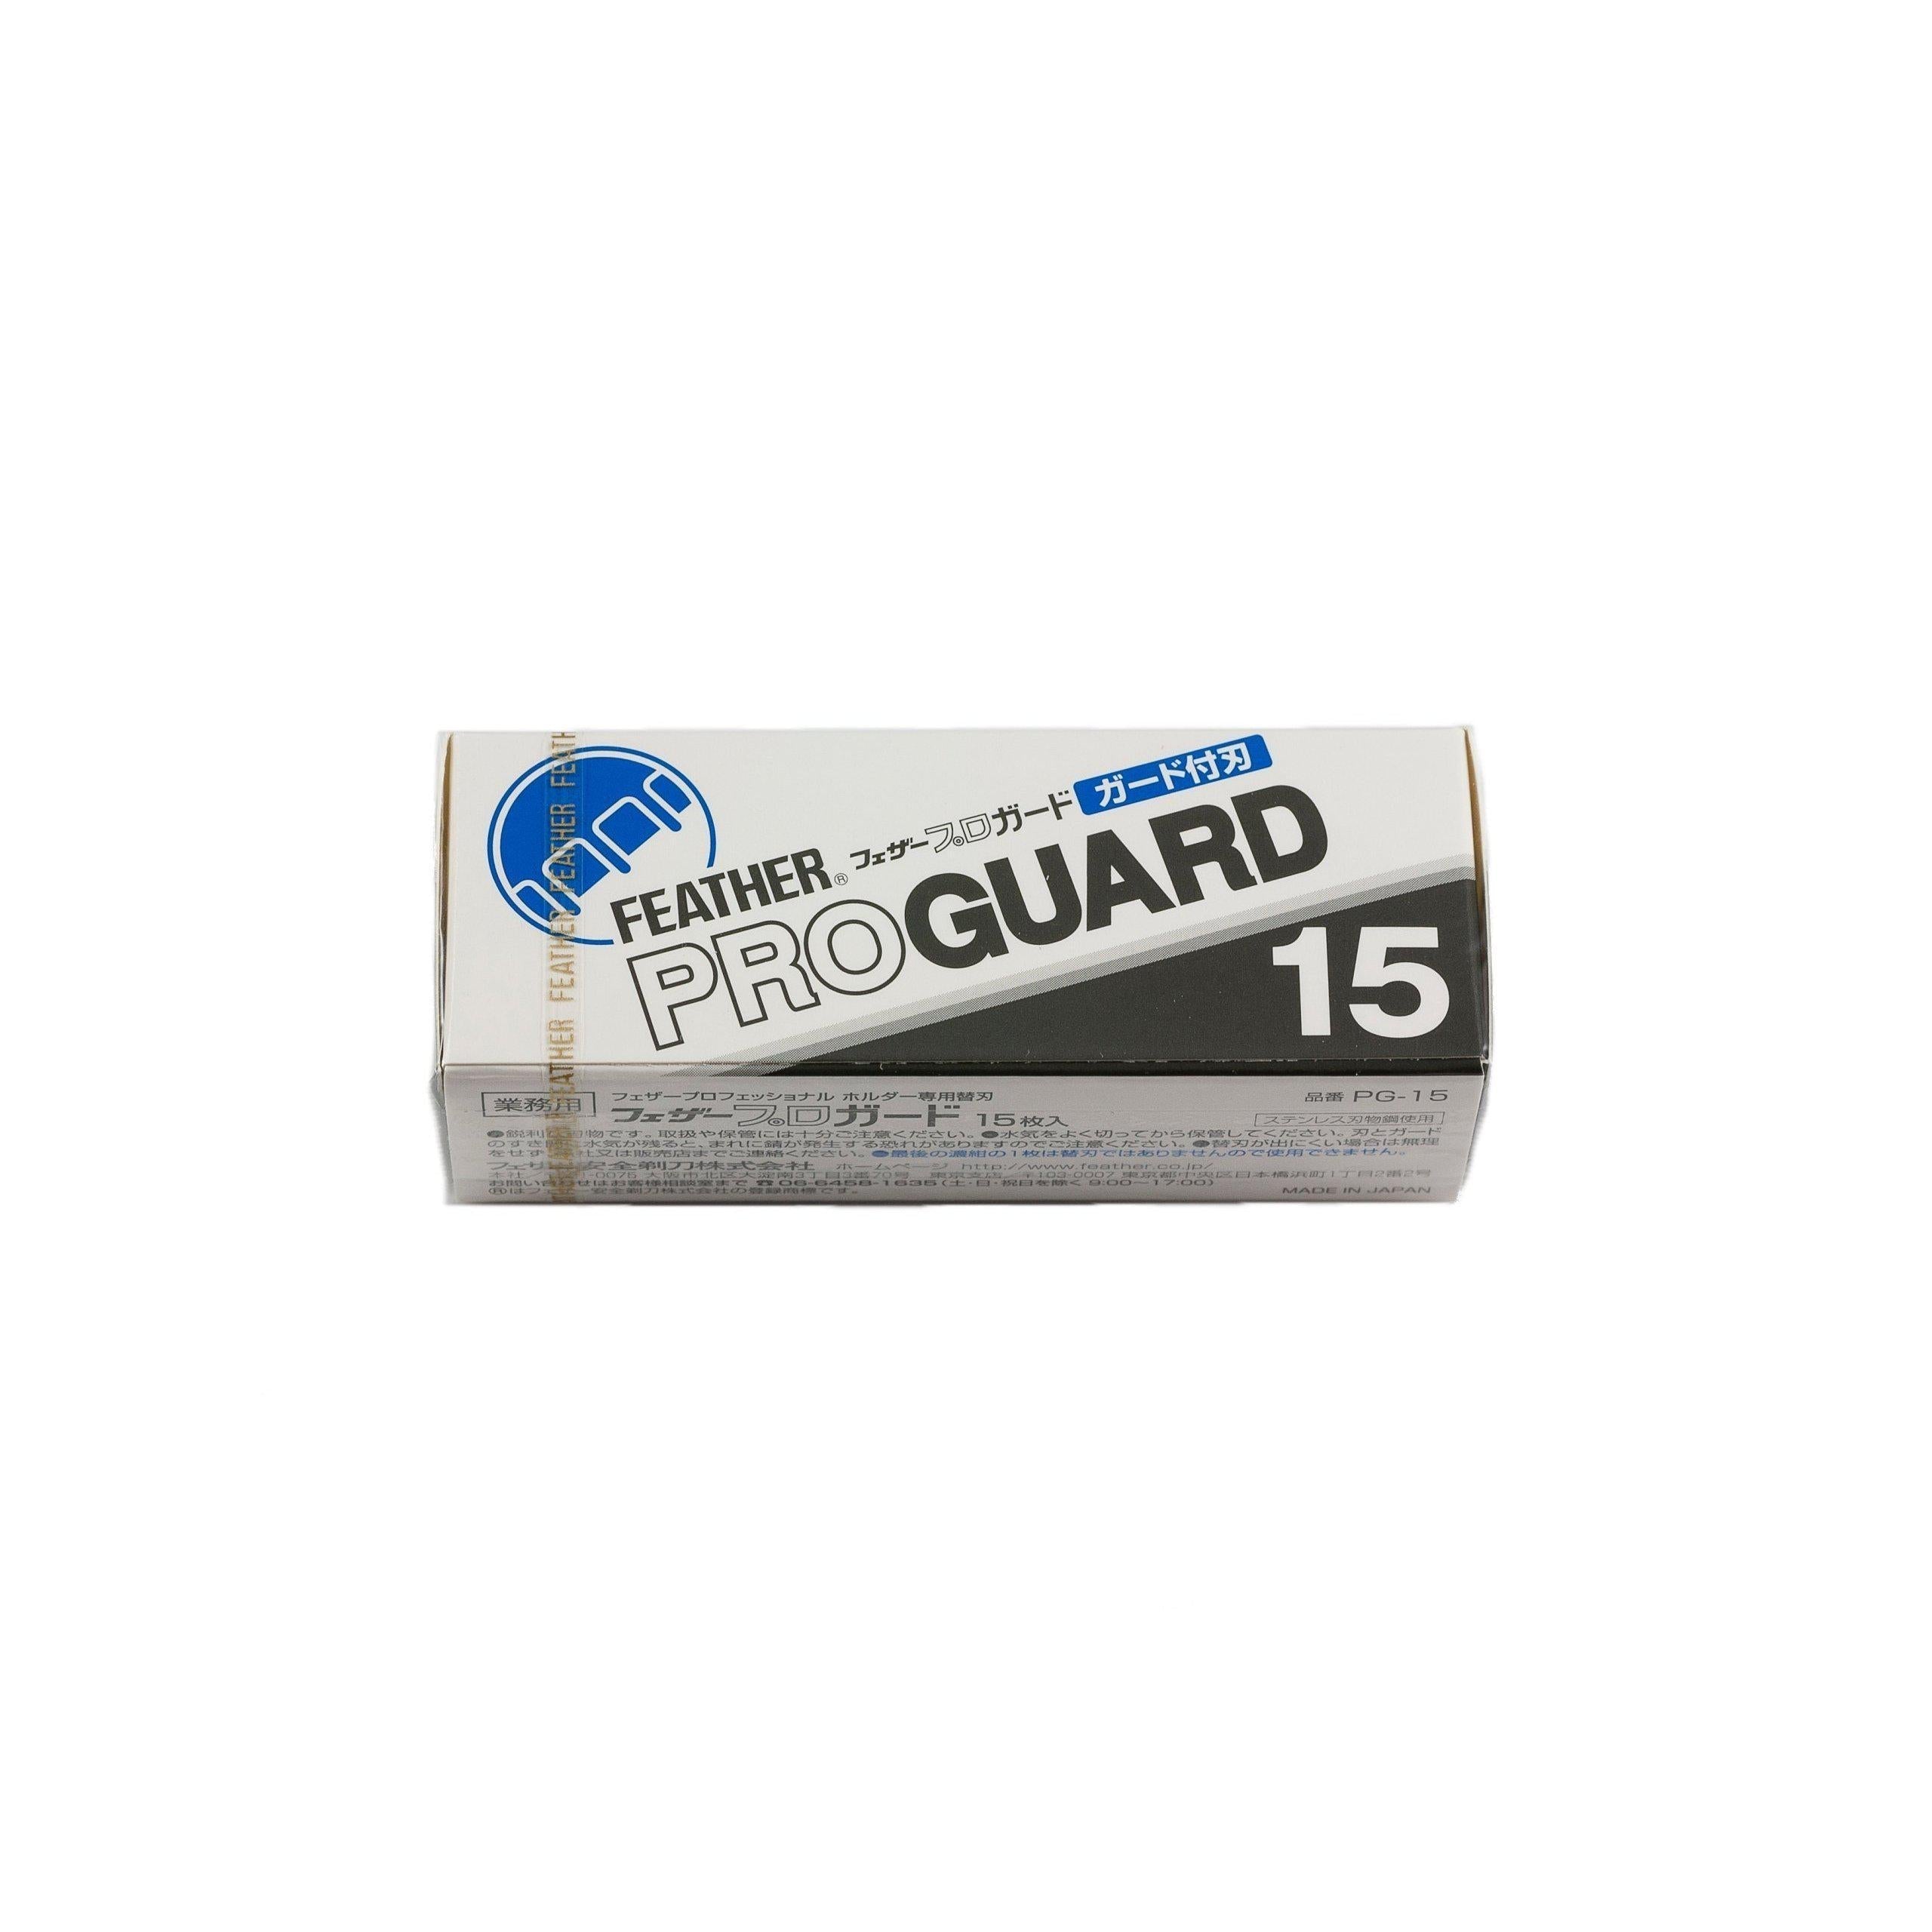 Feather Proguard Razor Blades PG-15 15 Blades (Pack of 10